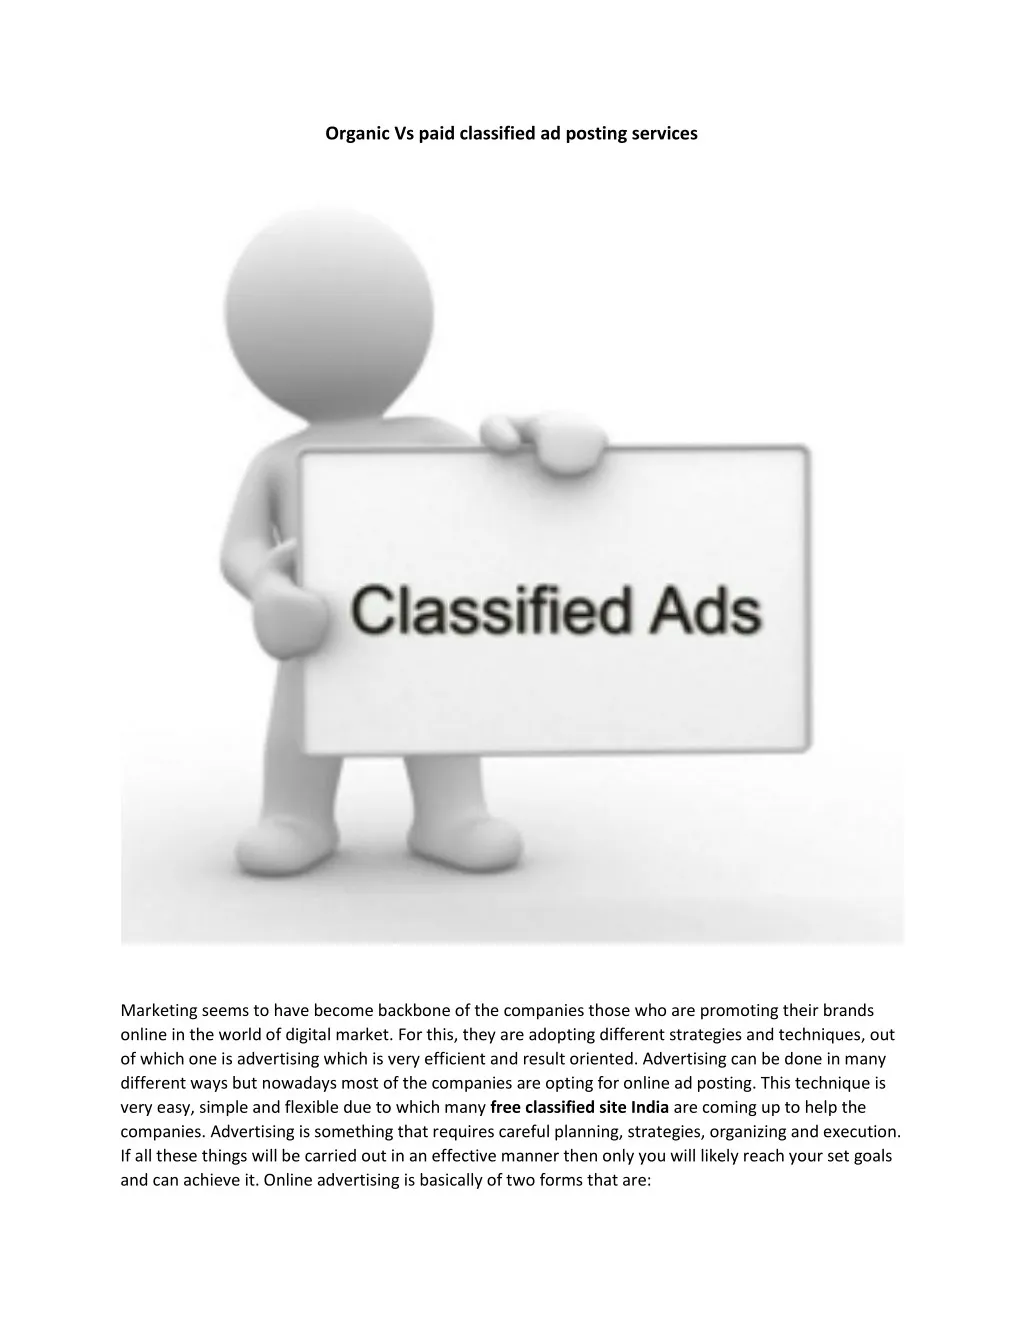 organic vs paid classified ad posting services n.